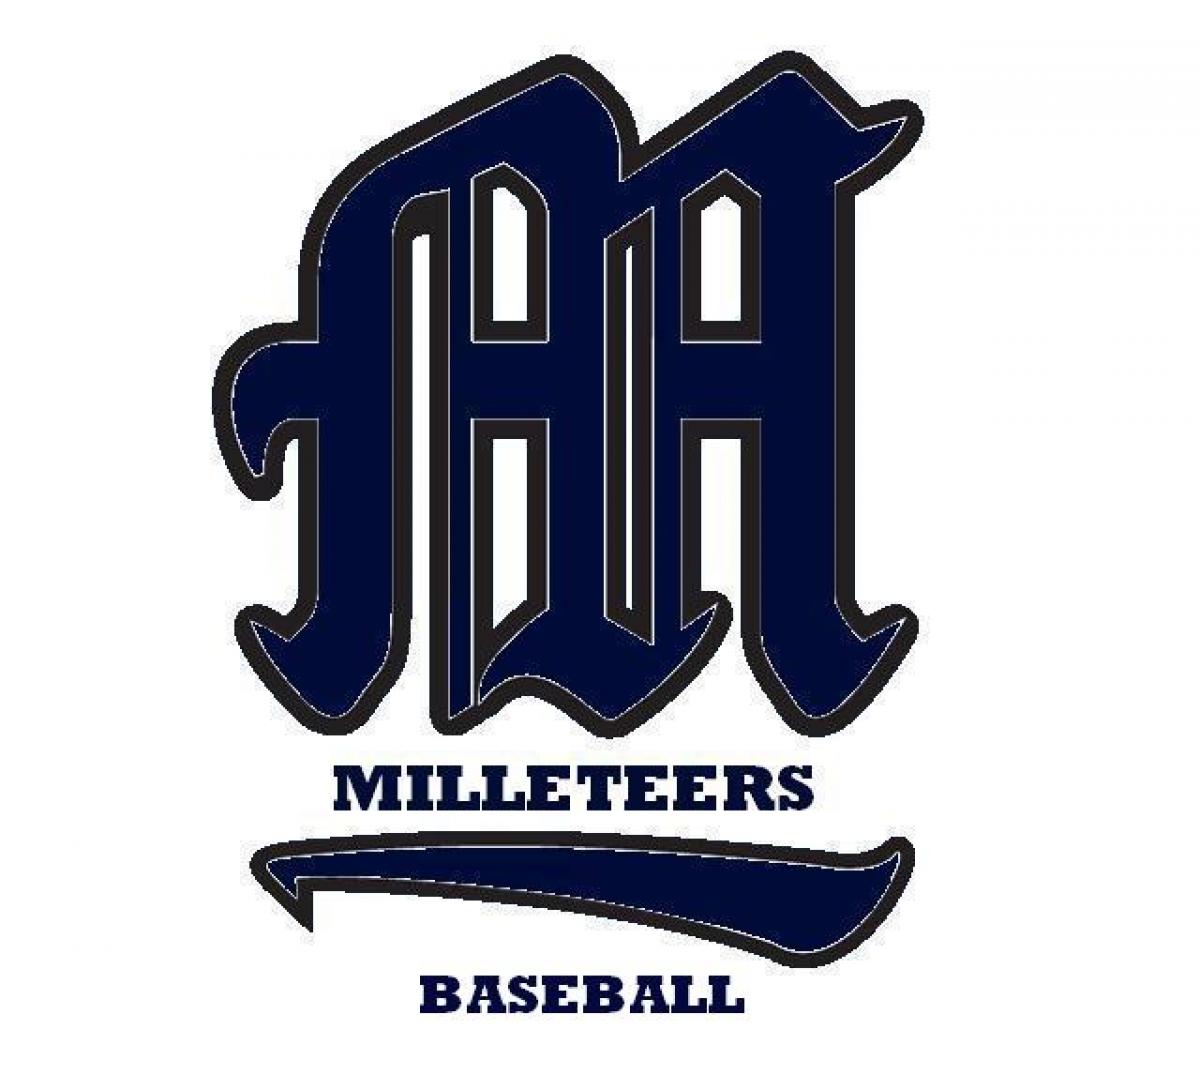 Milleteers Comeback Late To Squeak One Out